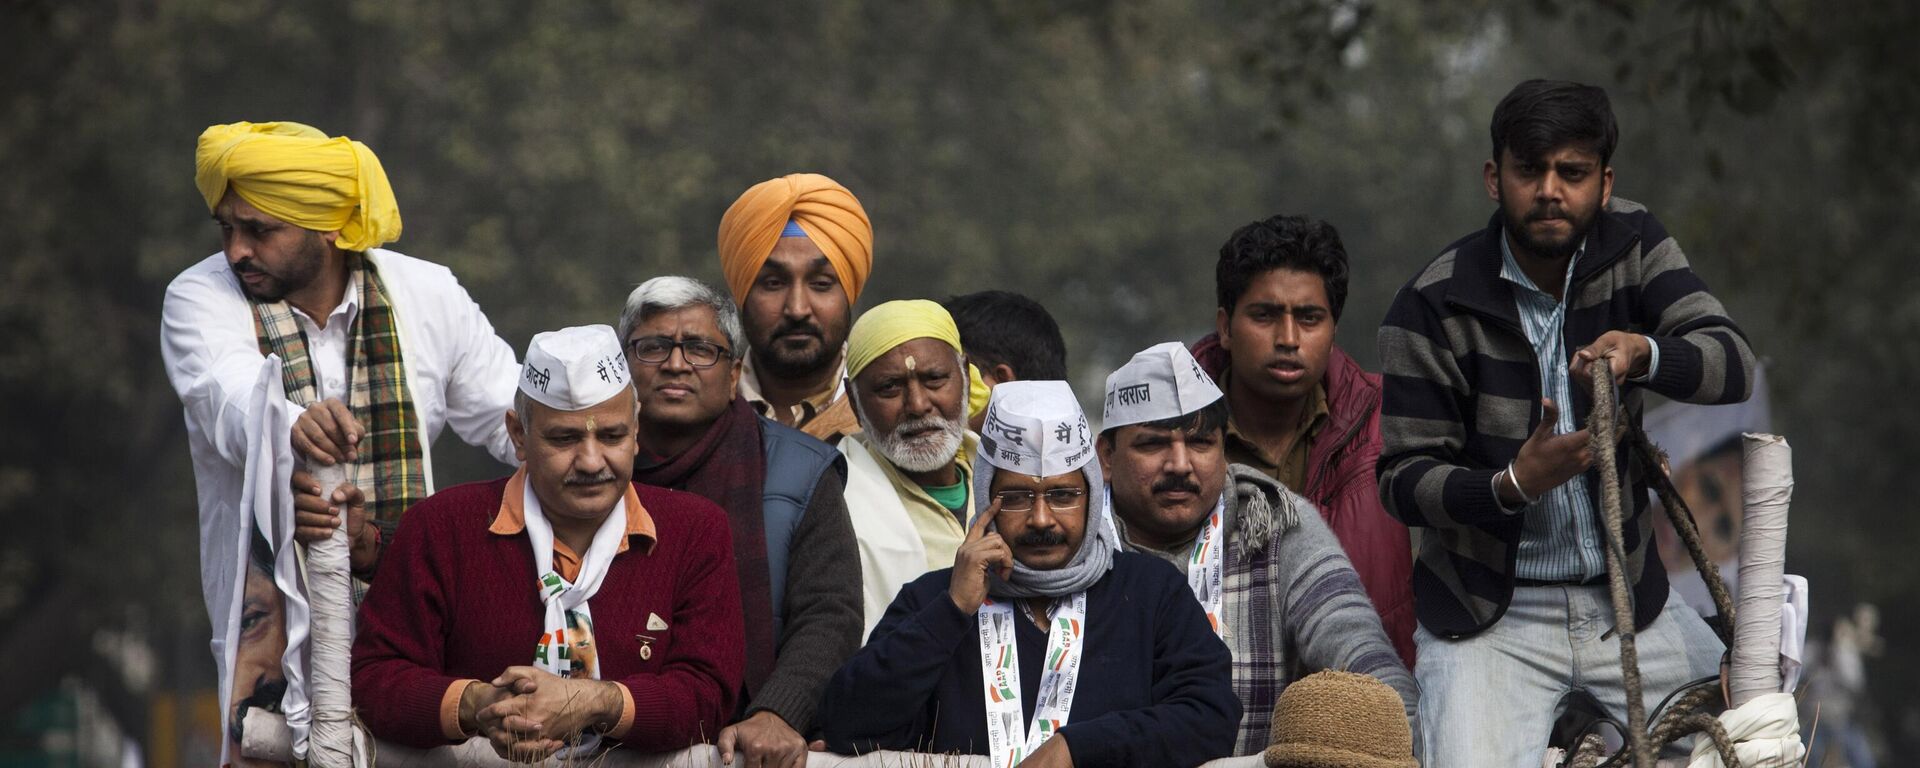 Aam Aadmi Party (AAP) or Common Man's Party chief Arvind Kerjiwal, center, with a muffler, sits on a truck during a road show ahead of filing his nomination papers for the Delhi state elections in New Delhi, India, Tuesday, Jan. 20, 2015. - Sputnik International, 1920, 28.11.2022